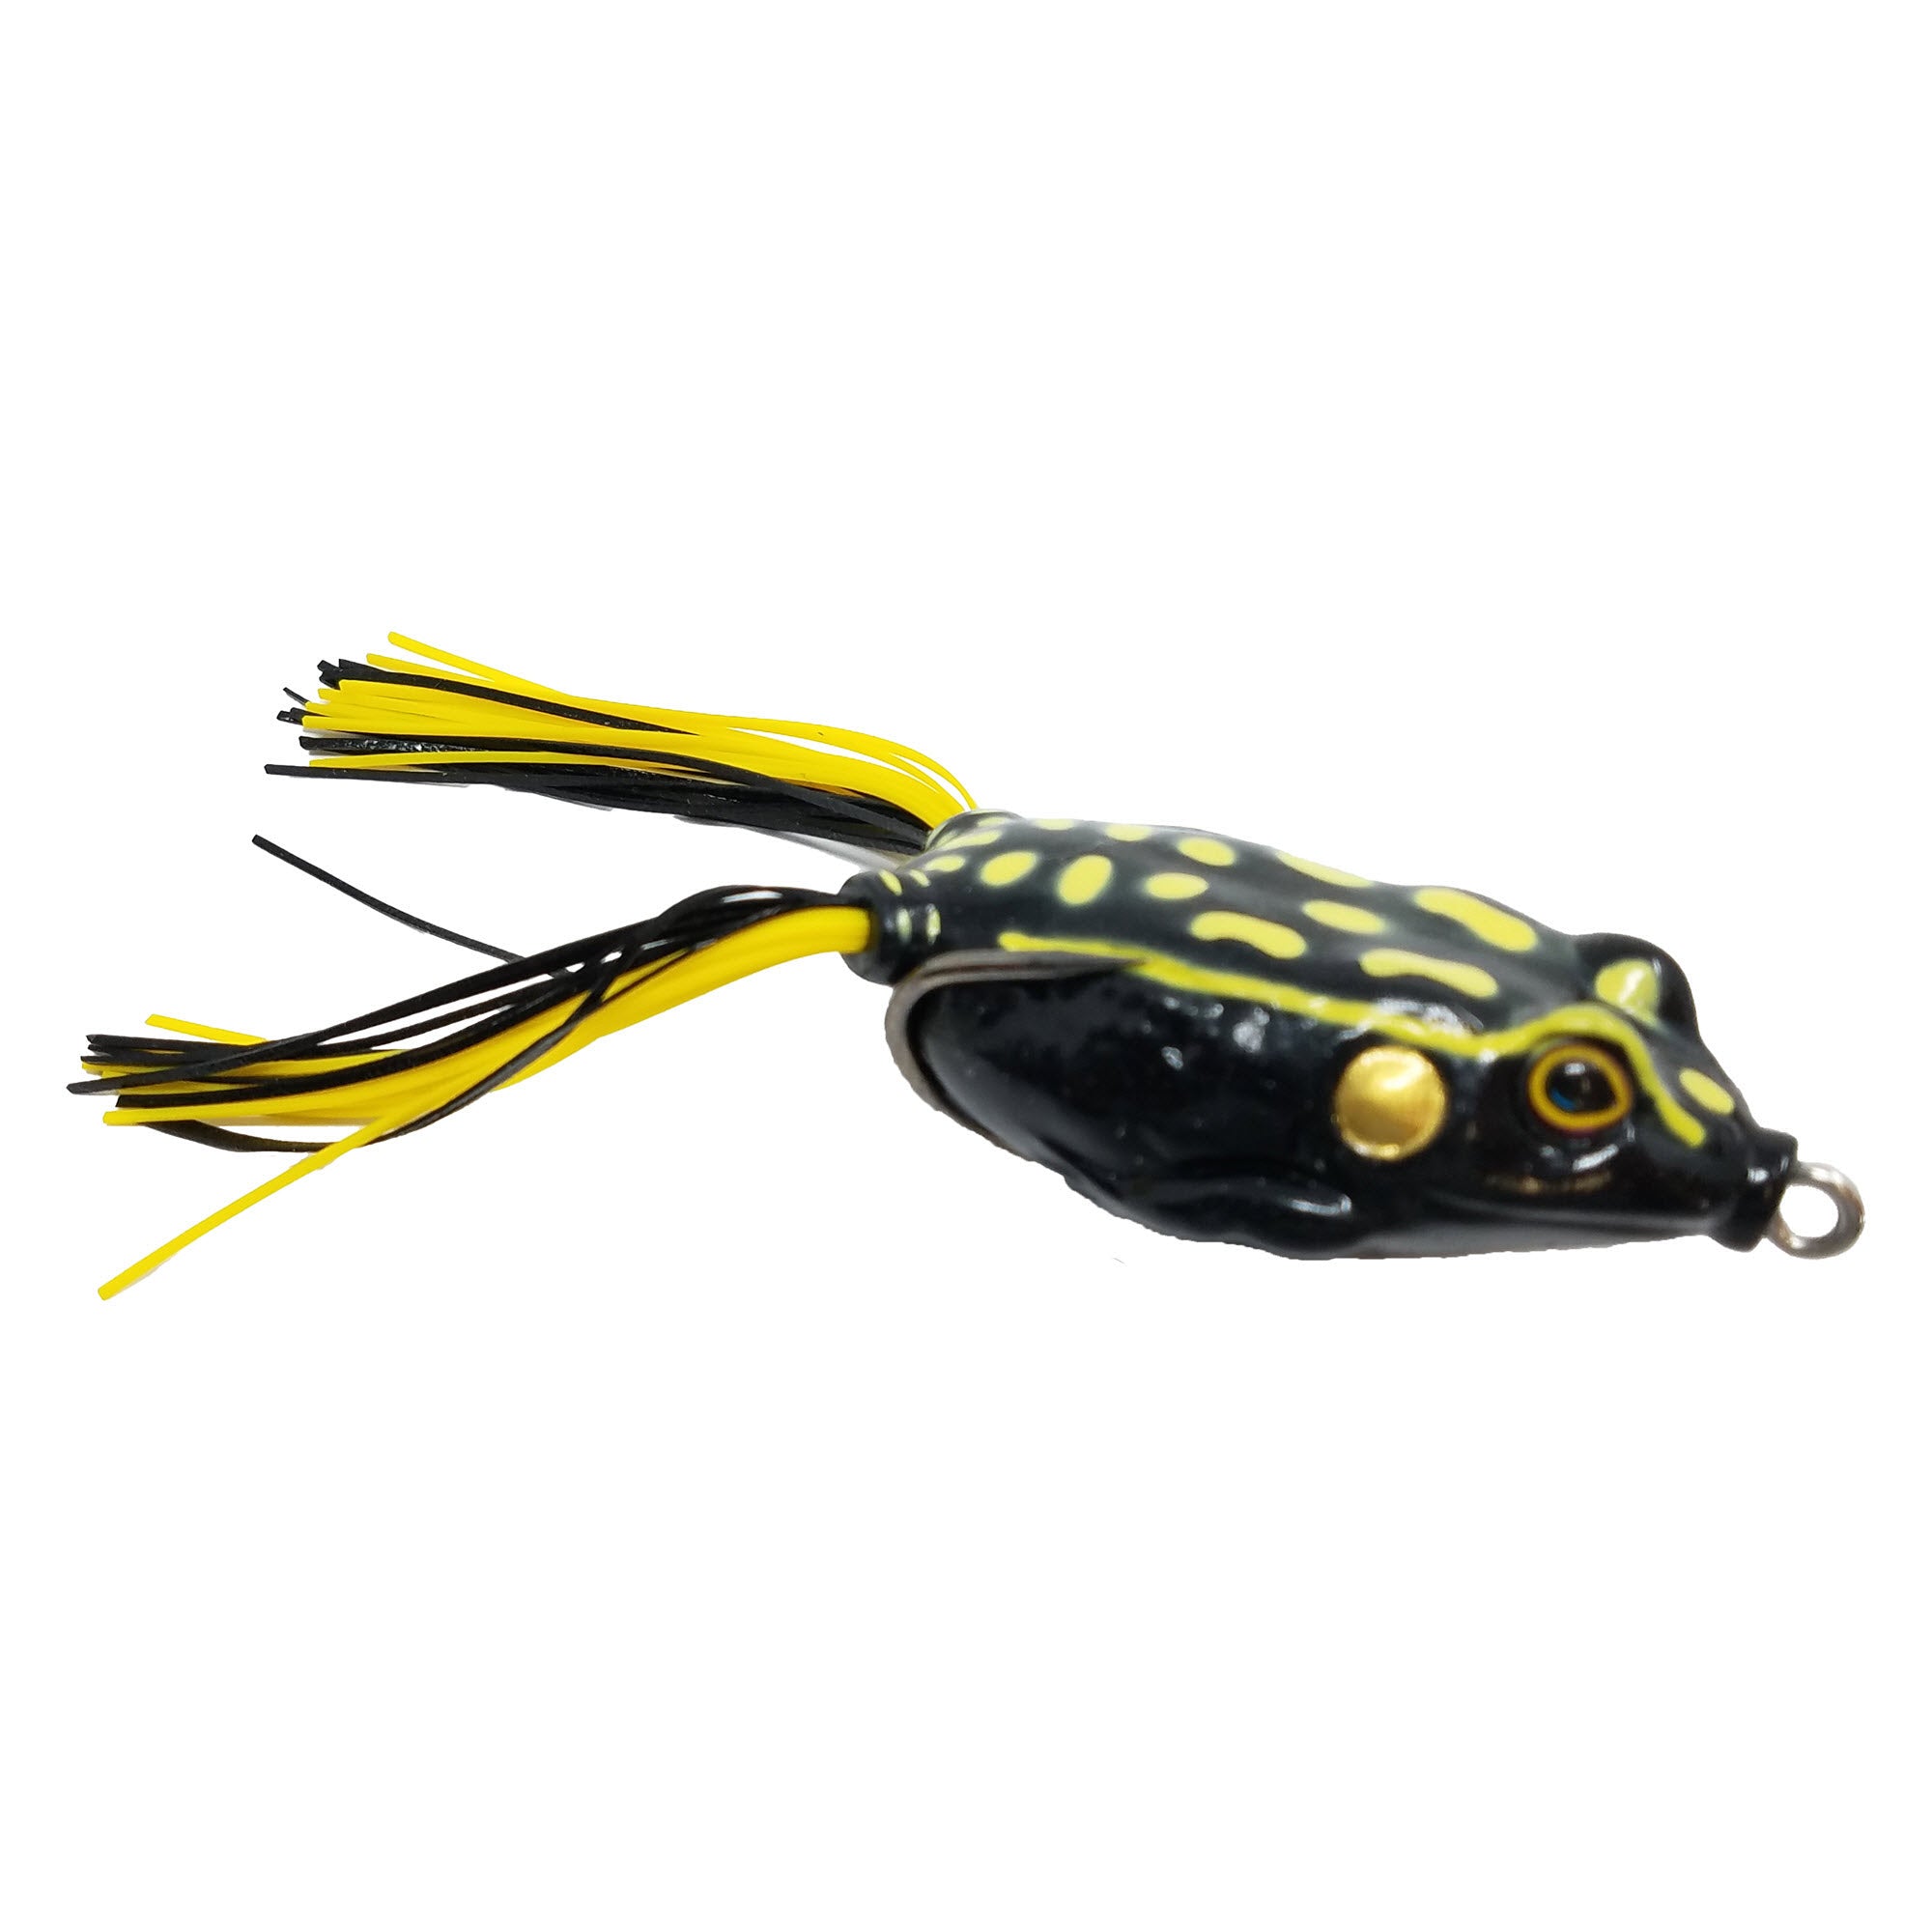 Frog Fishing Baits & Lures for sale, Shop with Afterpay